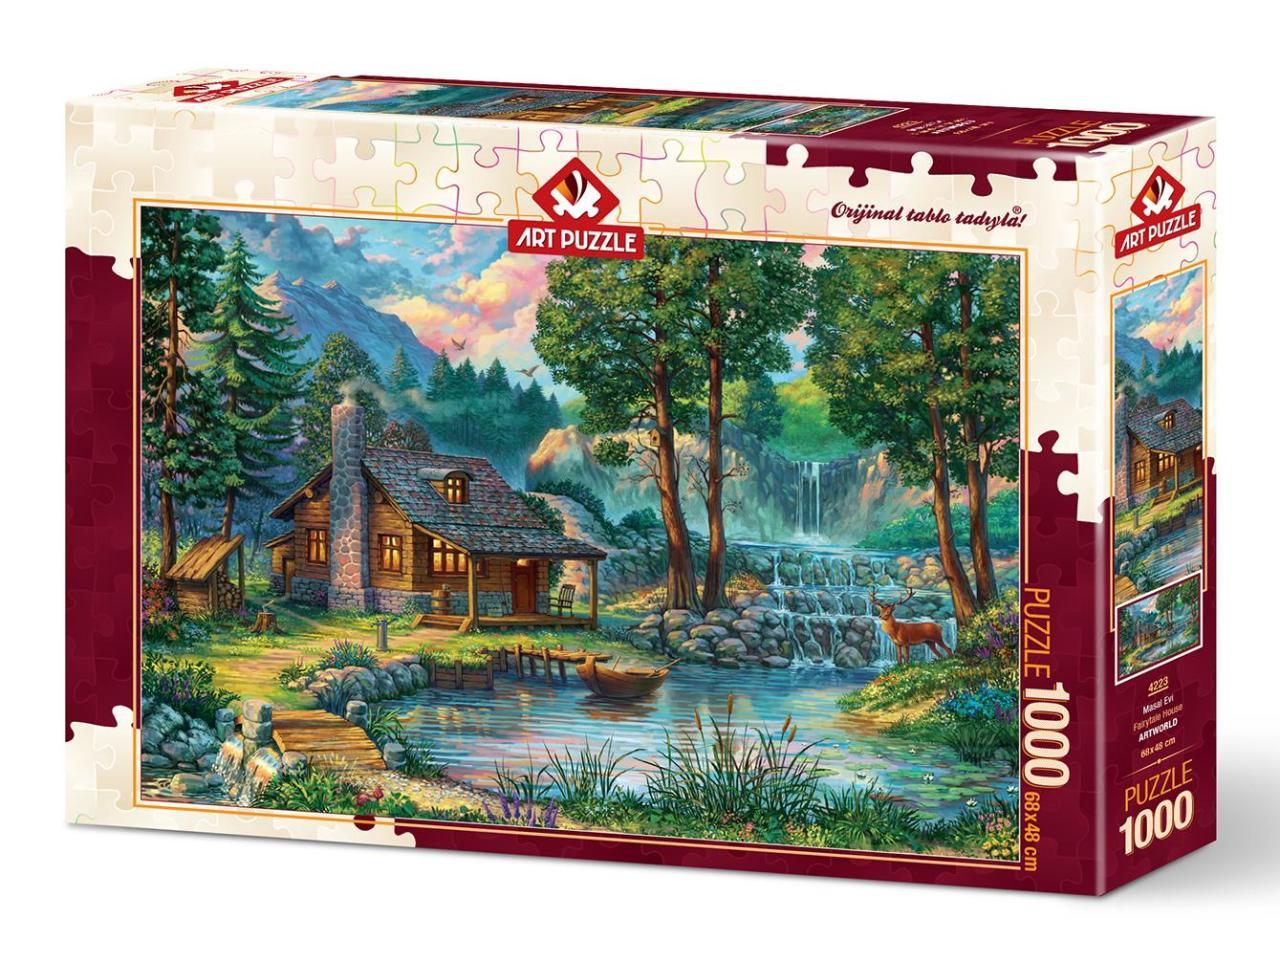 Ulmer Puzzleschmiede - Fairy Tales Forest Puzzle - 1000 Piece Puzzle -  Rakotzbrücke Kromlau in Germany with a Perfect Reflection in the Lake